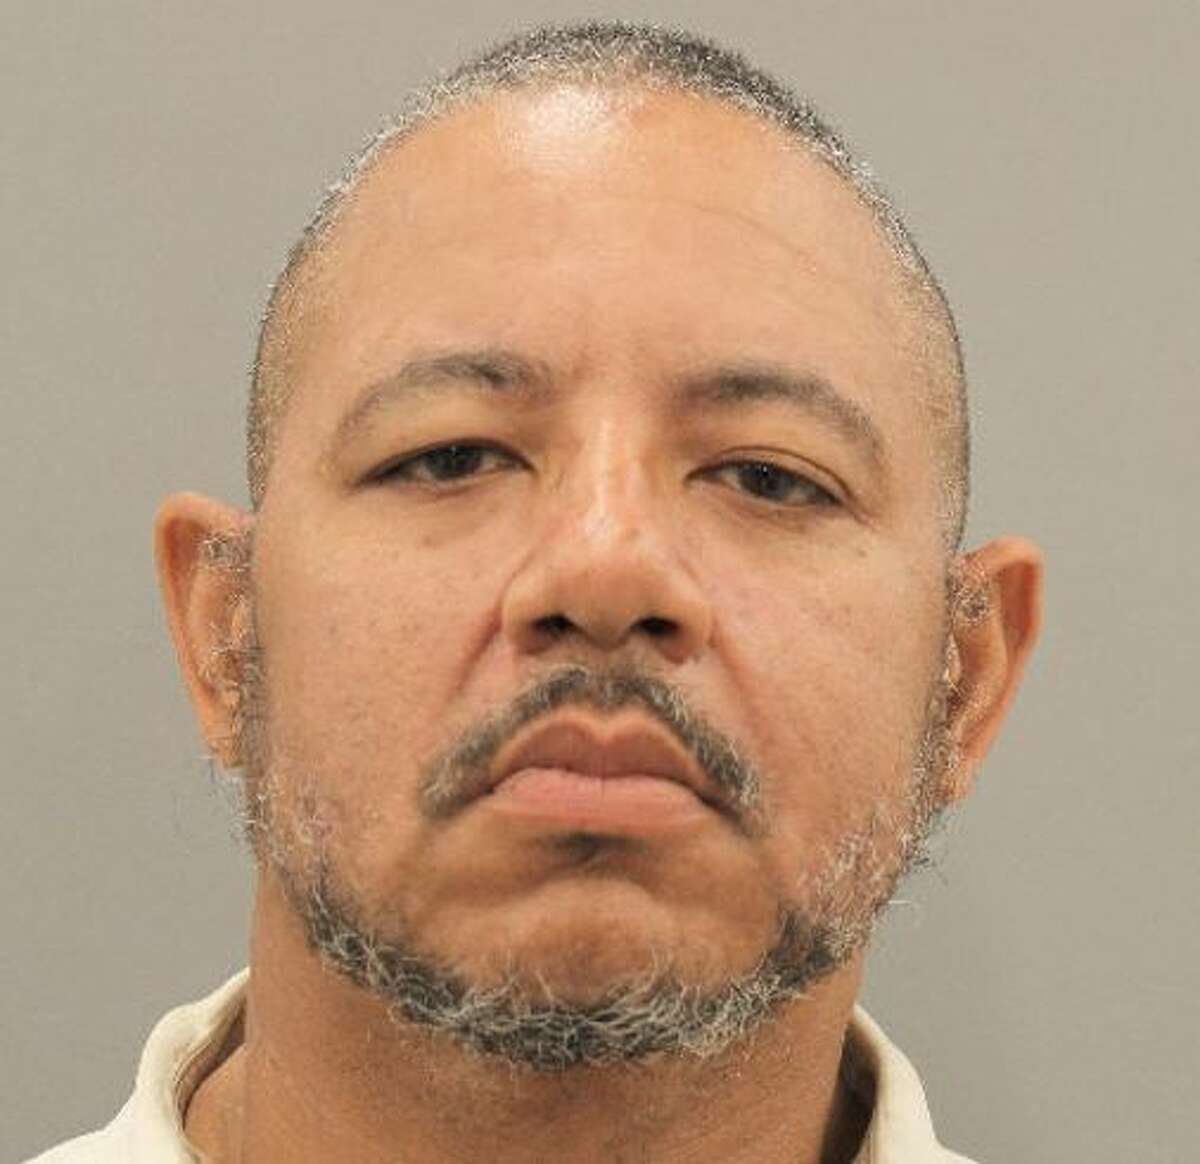 Police Houston man killed, dismembered wife days after detectives interviewed him about sex abuse claim